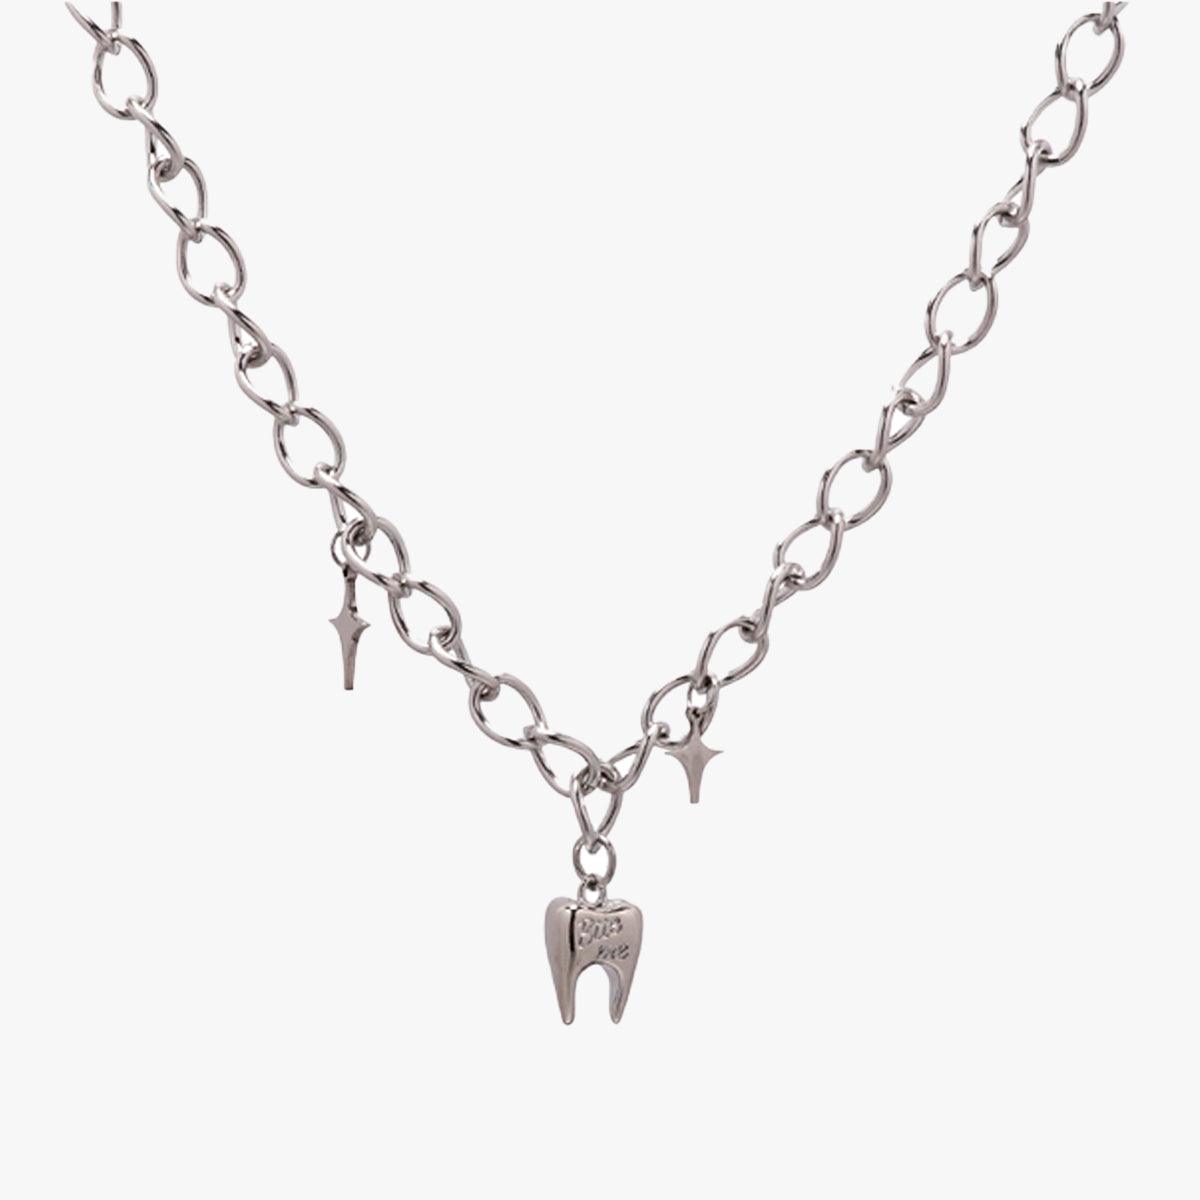 Steel Molar Tooth Grunge Chain Necklace - Aesthetic Clothes Shop